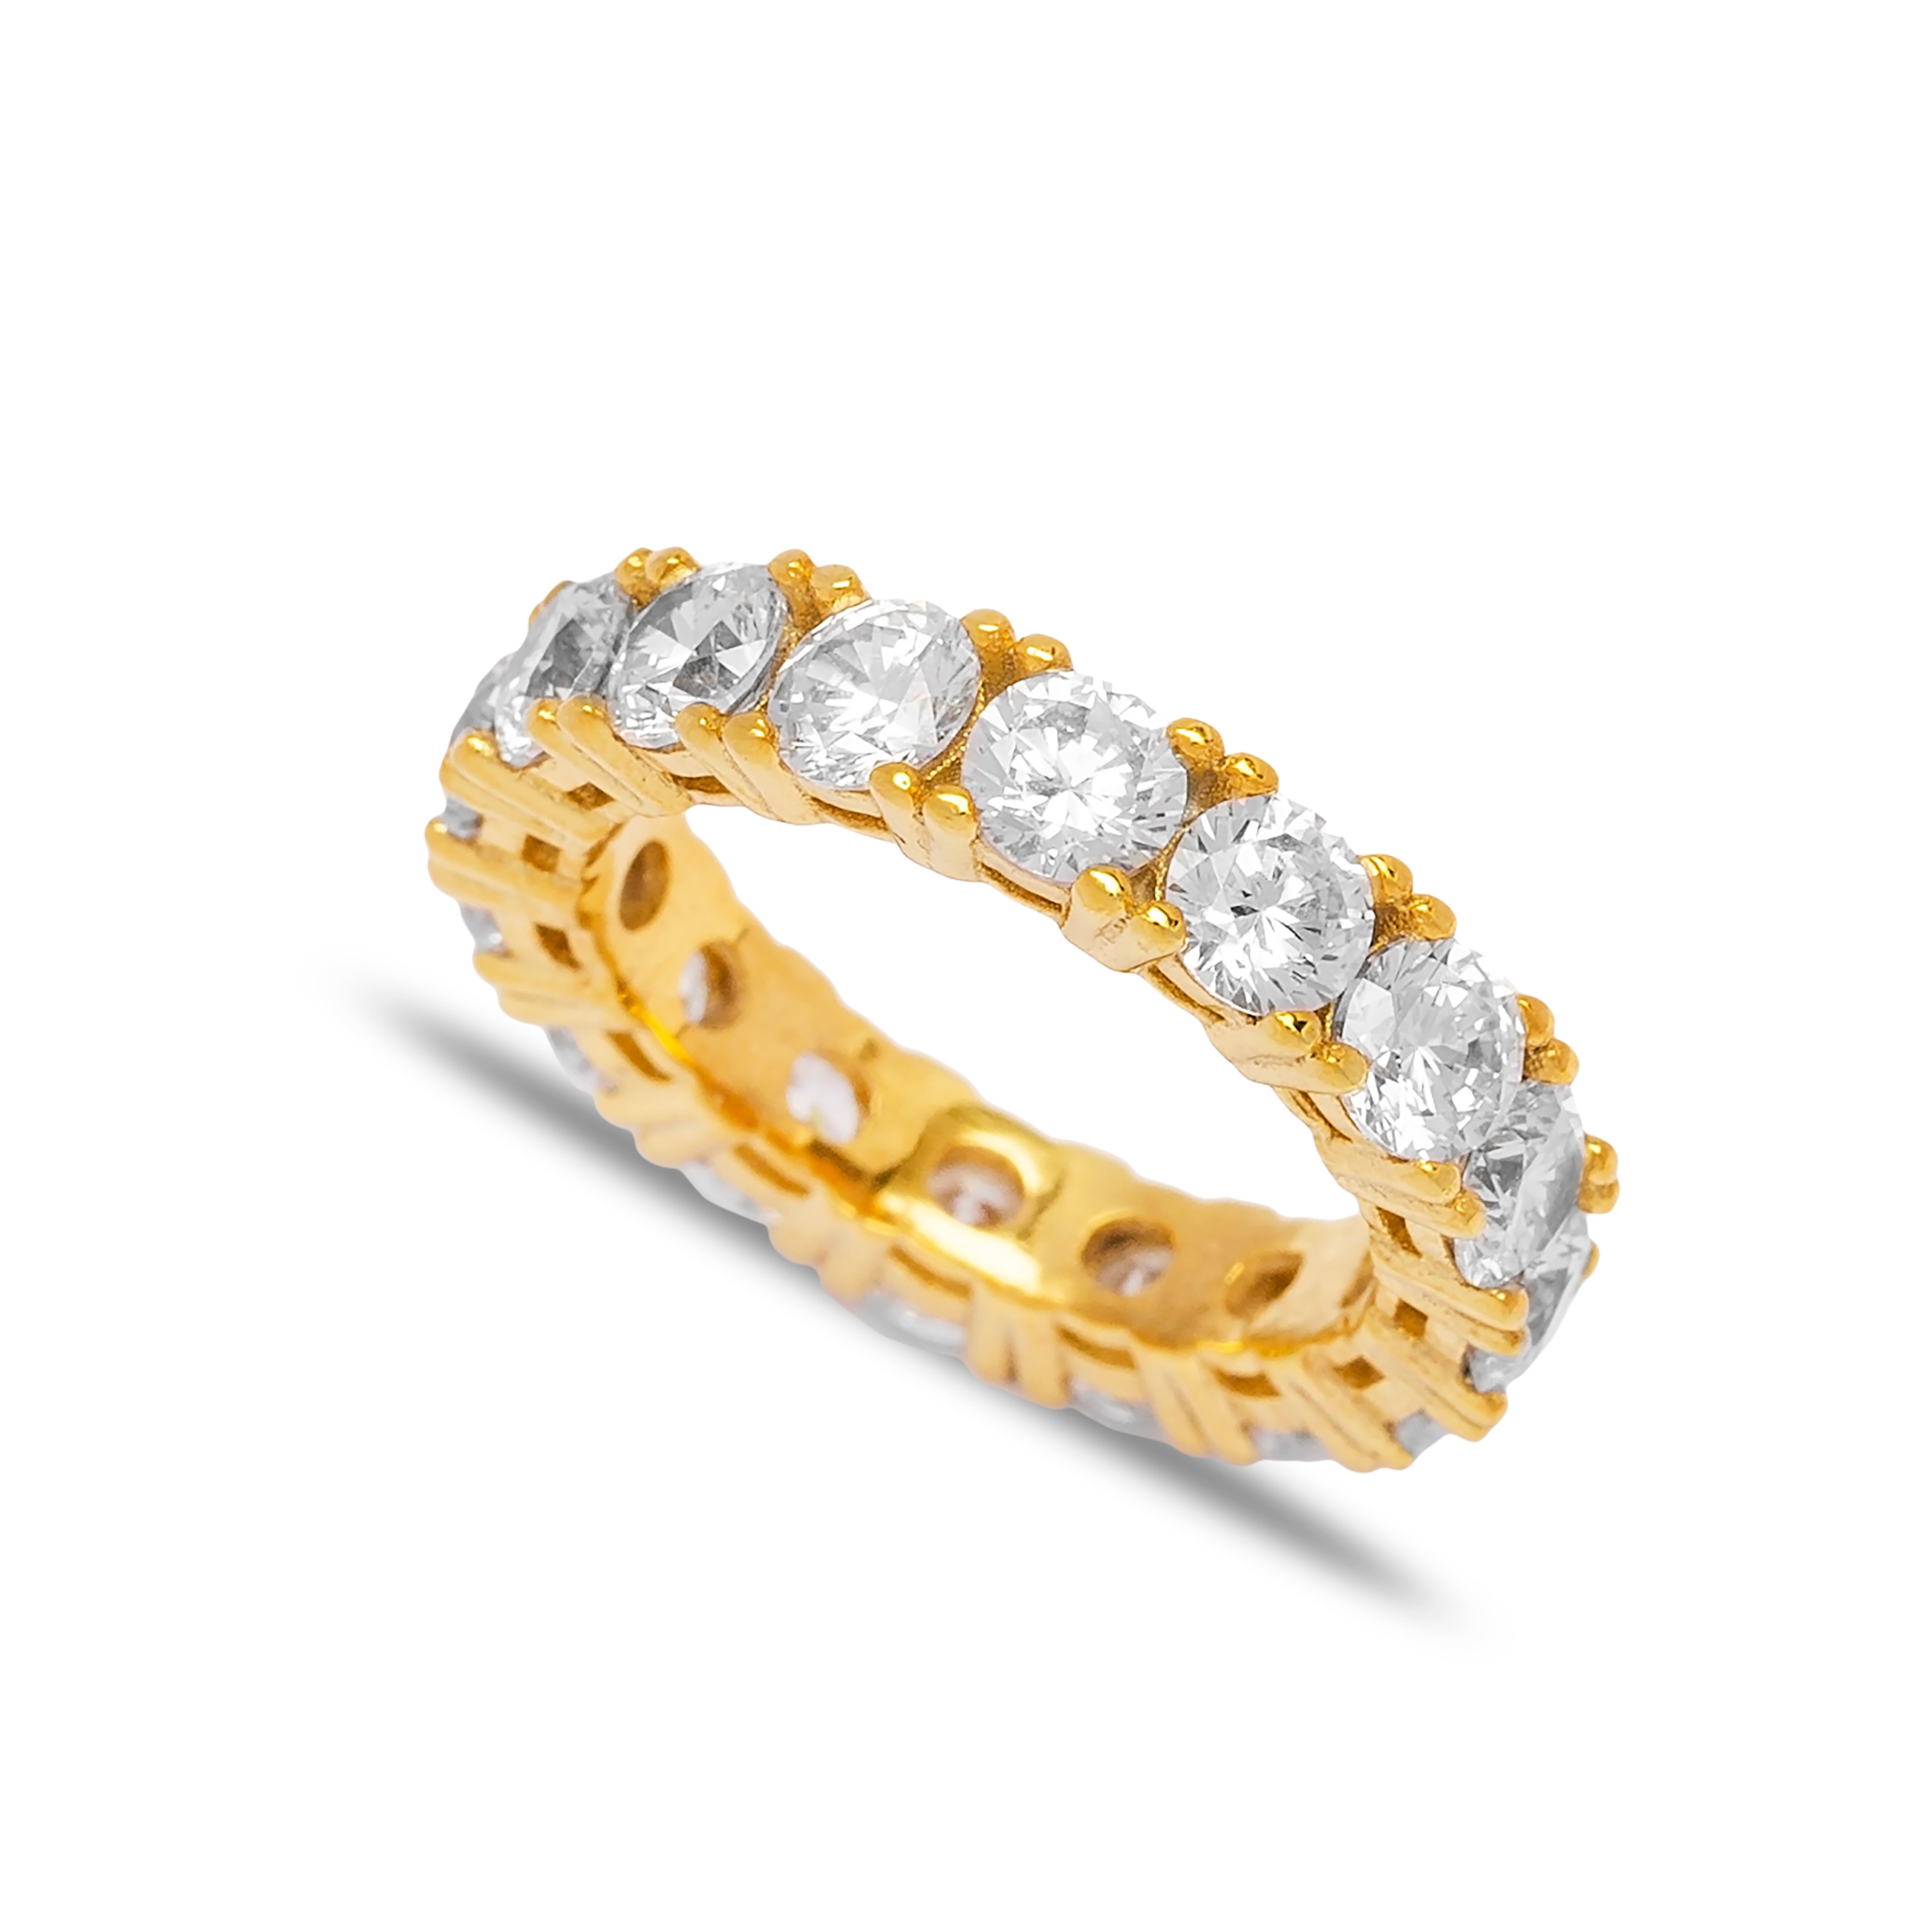 Shiny Gold Band Ring with Sparkling Diamonds, Classic Cocktail Ring Crafted by Twin Jewellery